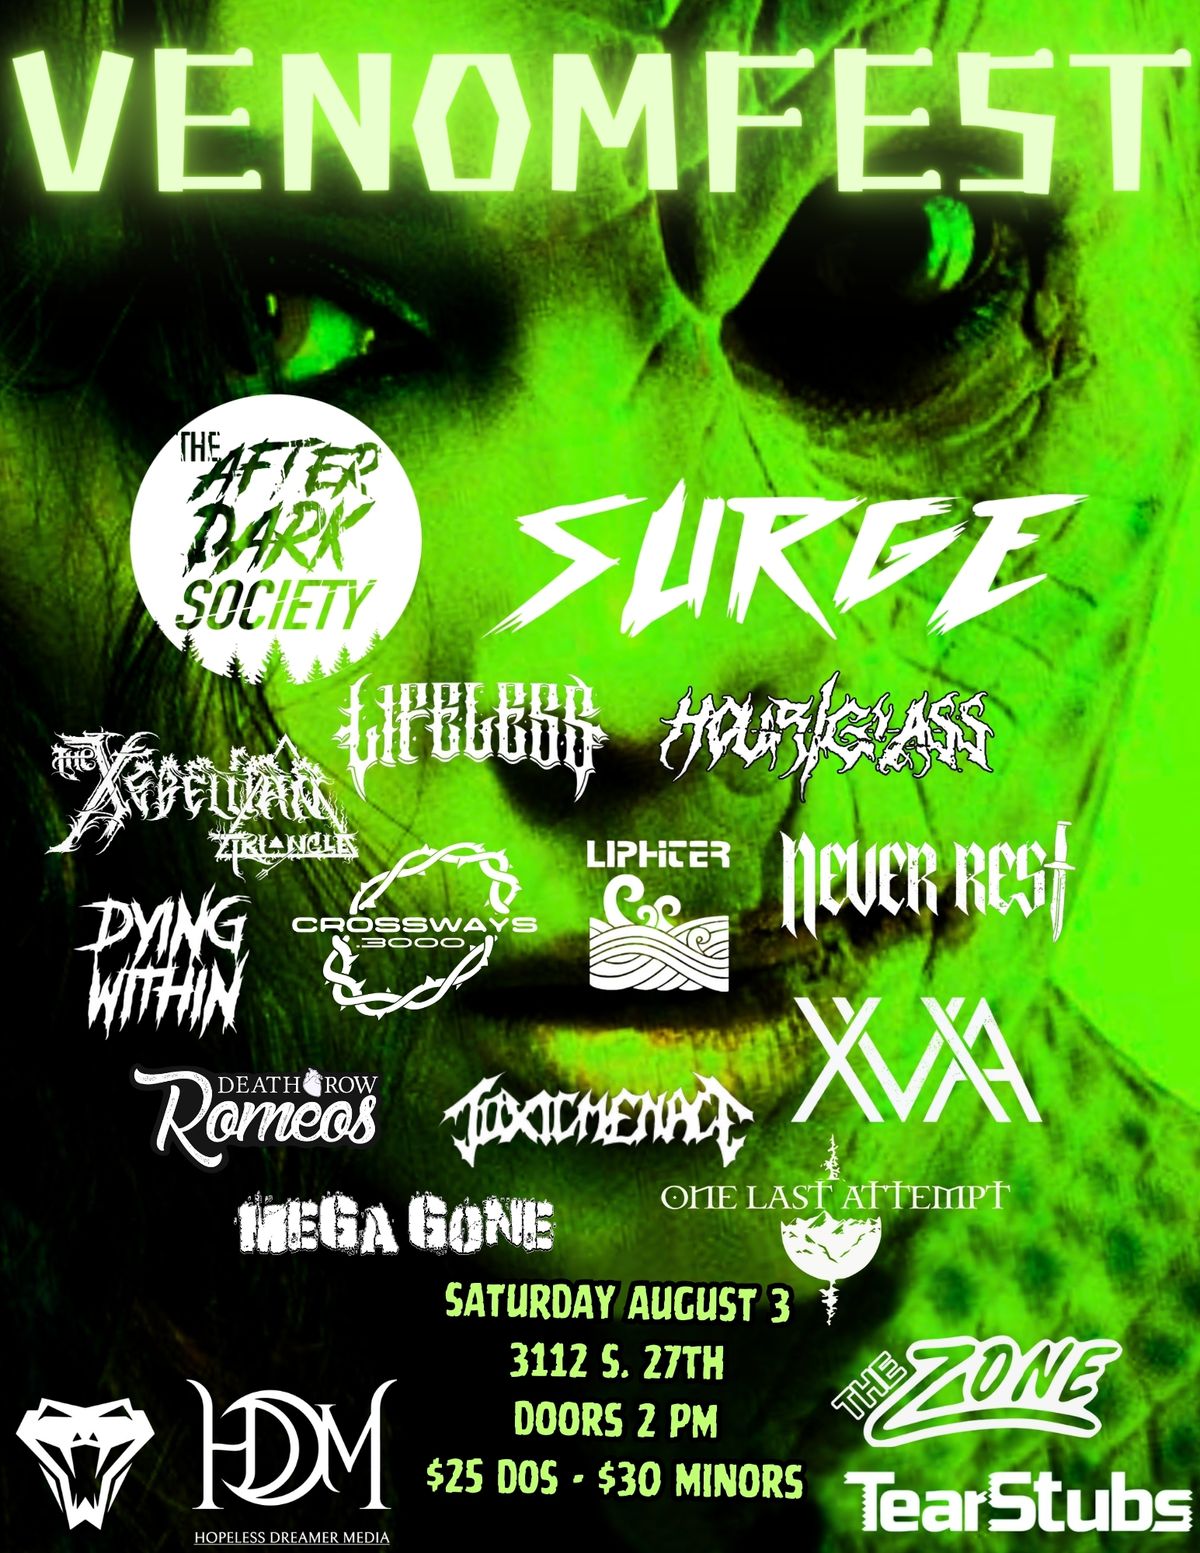 VENOMFEST | THE AFTER DARK SOCIETY, SURGE, THE XEBELLIAN TRIANGLE, LIFELESS, NEVER REST, & MORE!